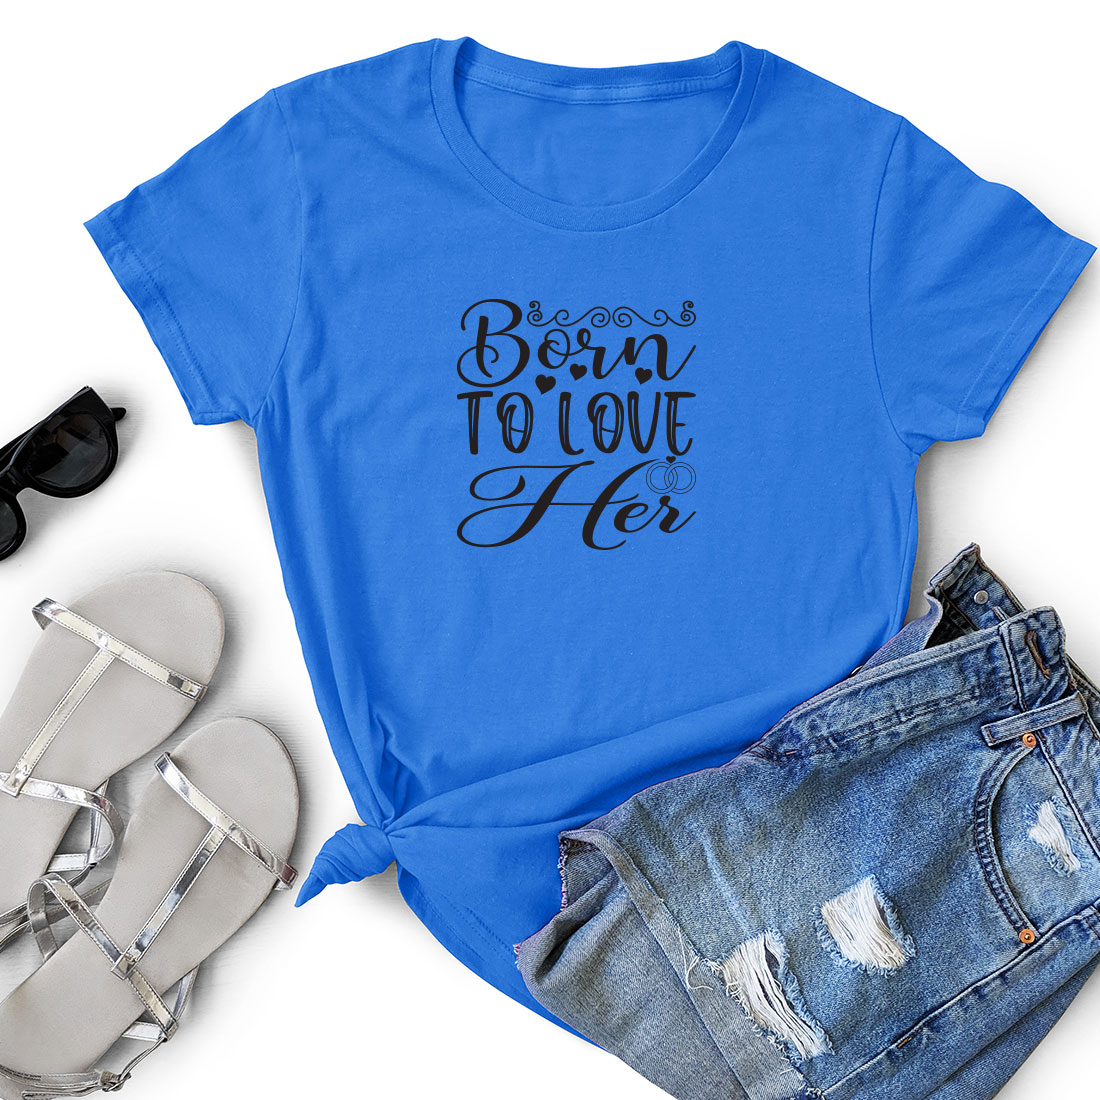 Blue shirt that says born to love her.